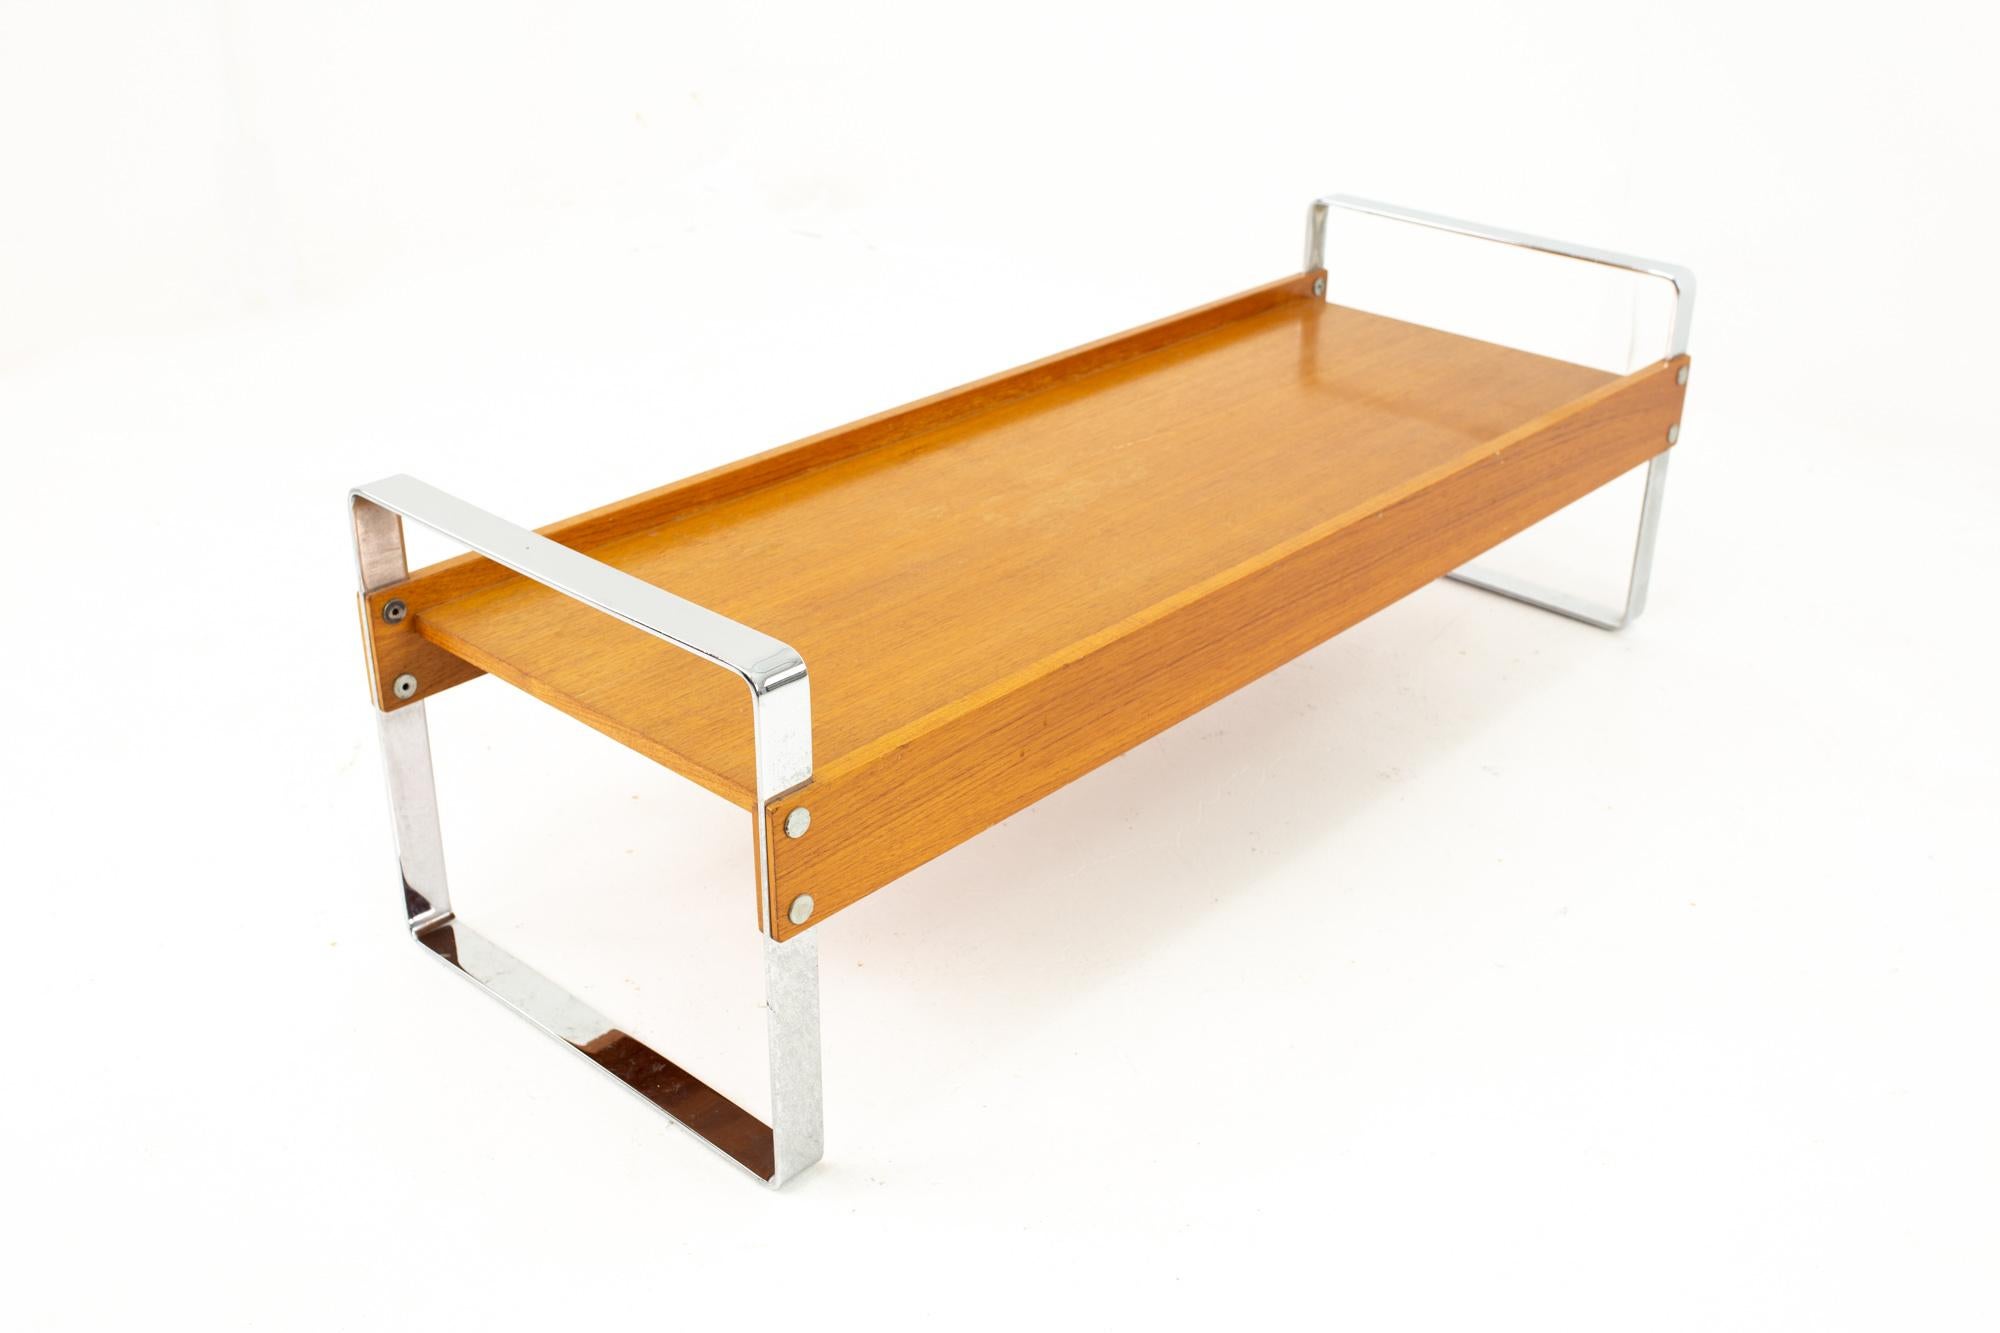 Domino Mobler Mid Century Chrome and Teak Bench

Bench measures: 47.5 wide x 17.5 deep x 15 high

This price includes getting this piece in what we call Restored Vintage Condition. That means the piece is permanently fixed upon purchase so it’s